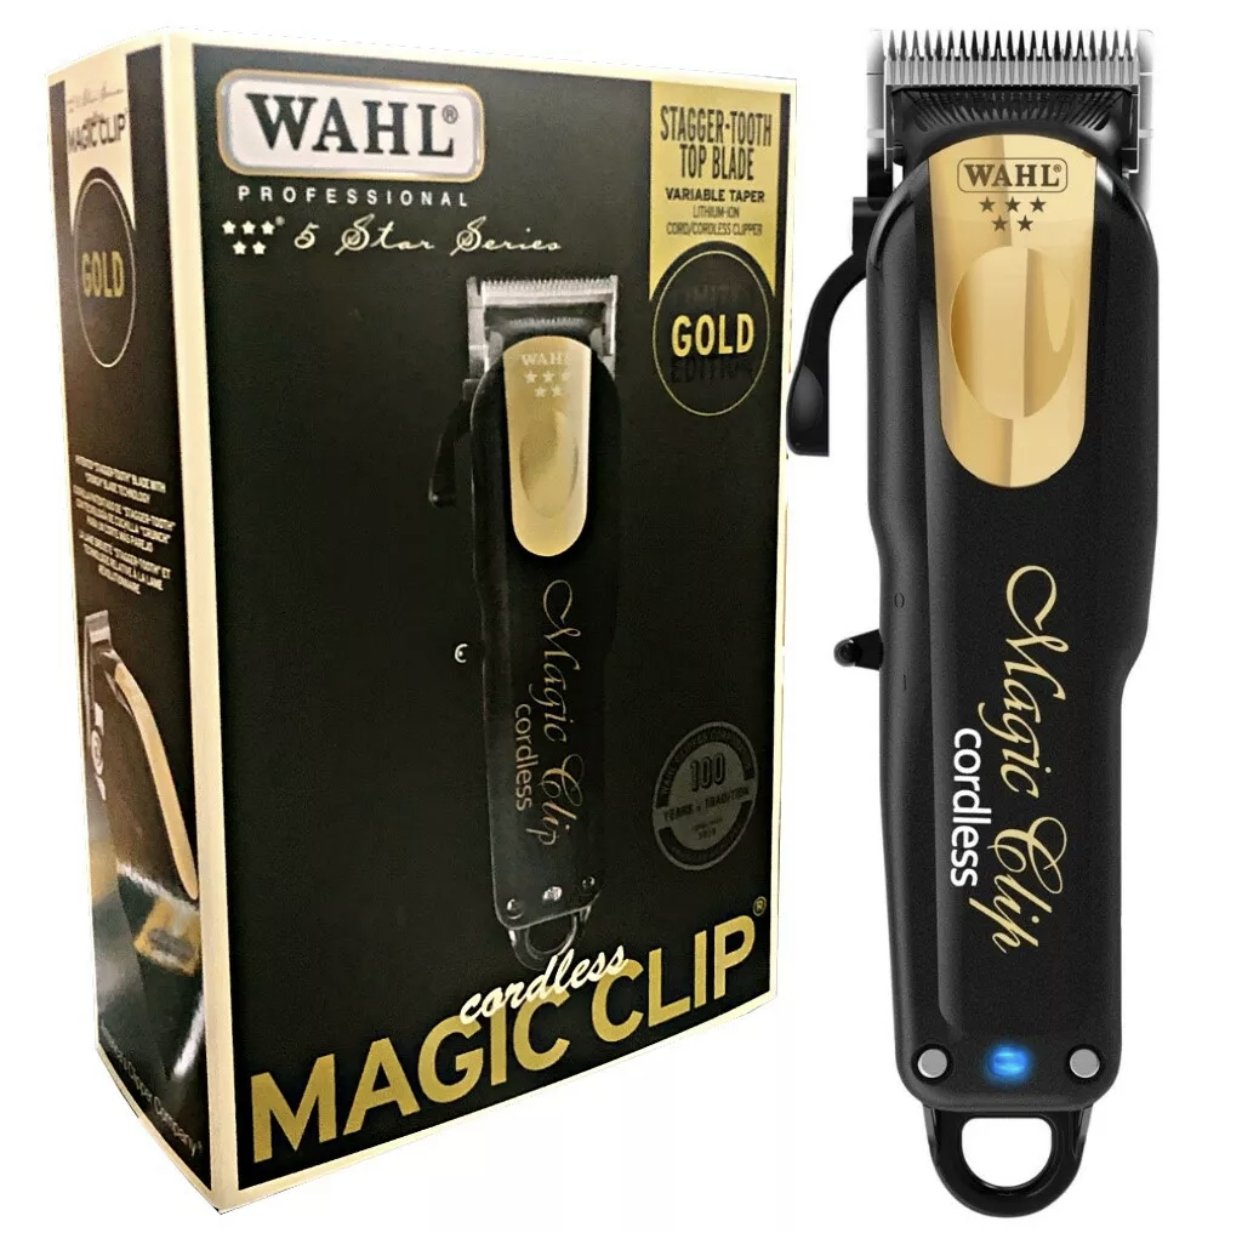 wahl clippers magic clip cordless